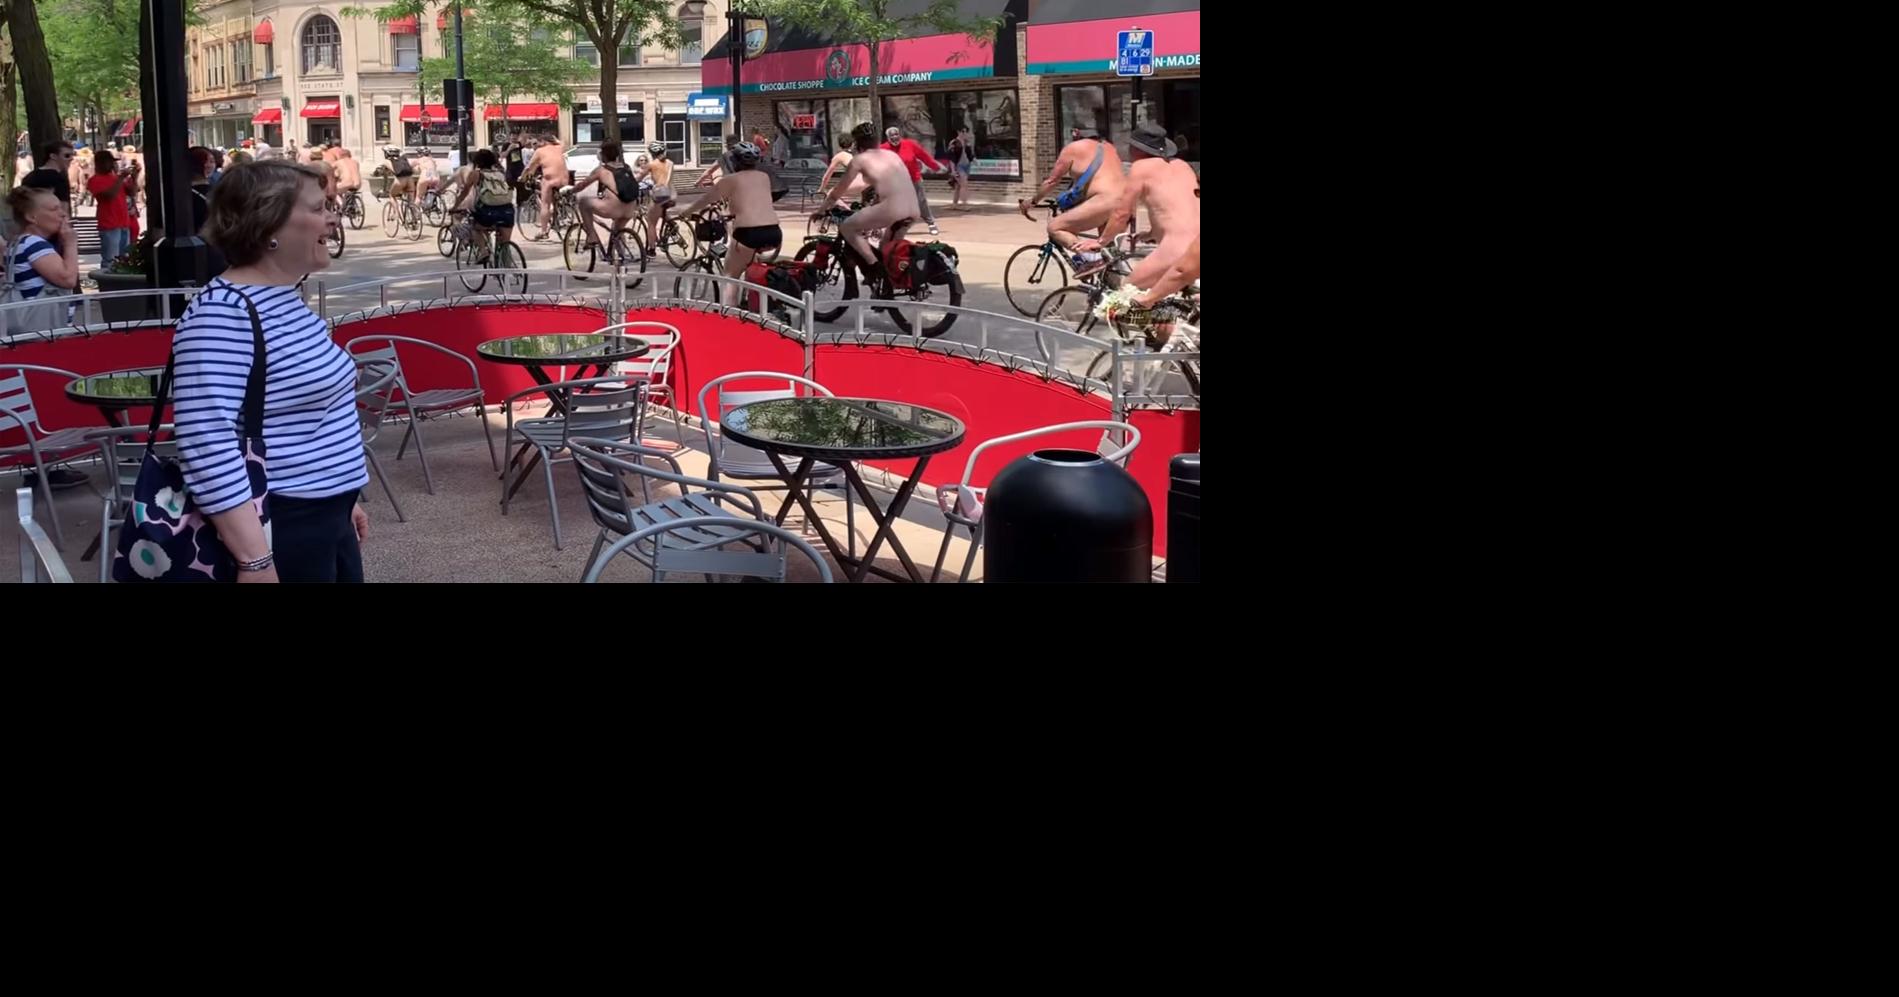 In case you missed it: Scenes from Saturday's World Naked Bike Ride in Madison